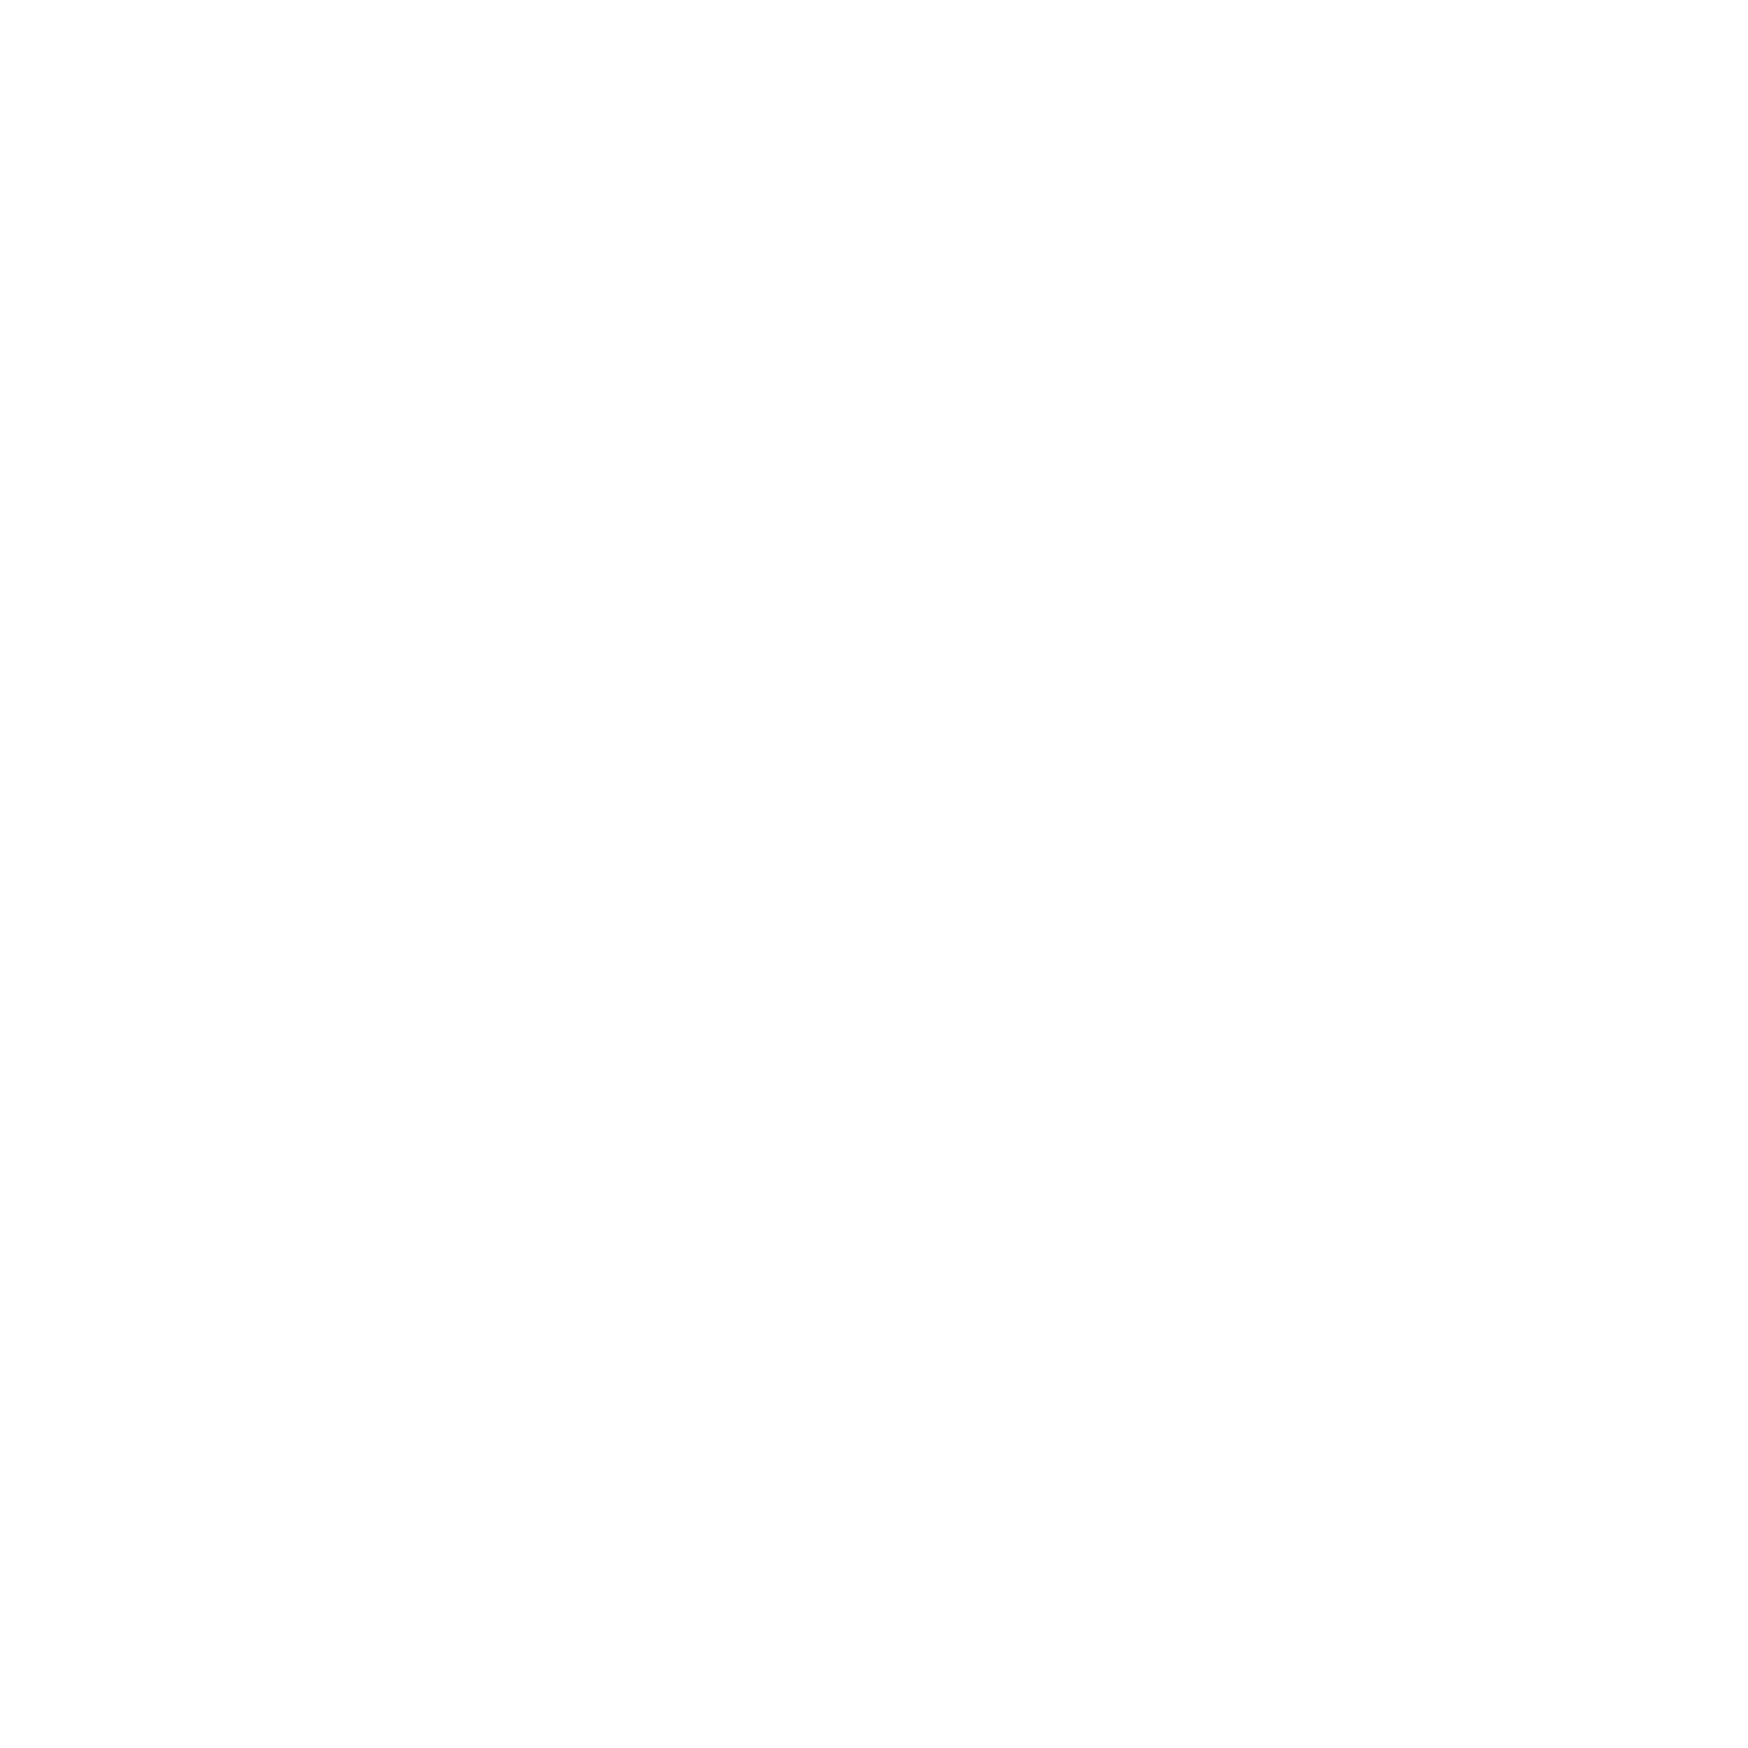 KNOW the animals